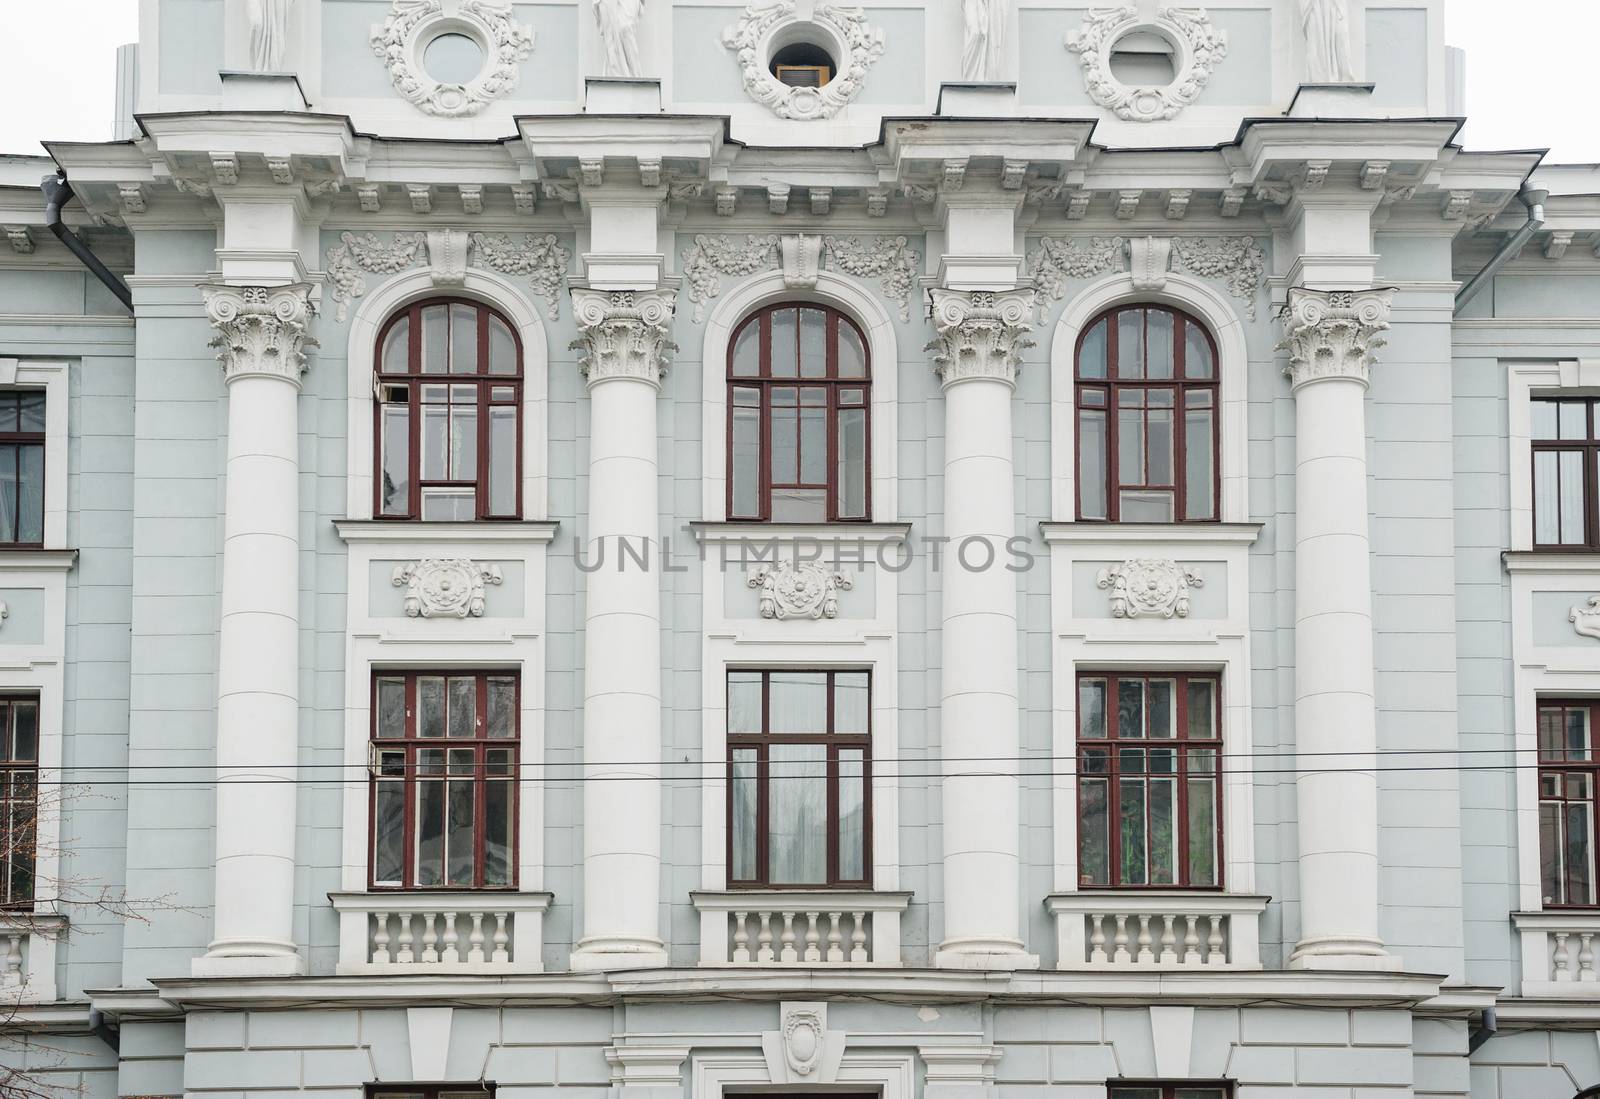 architecture of the historic building with Windows and columns.